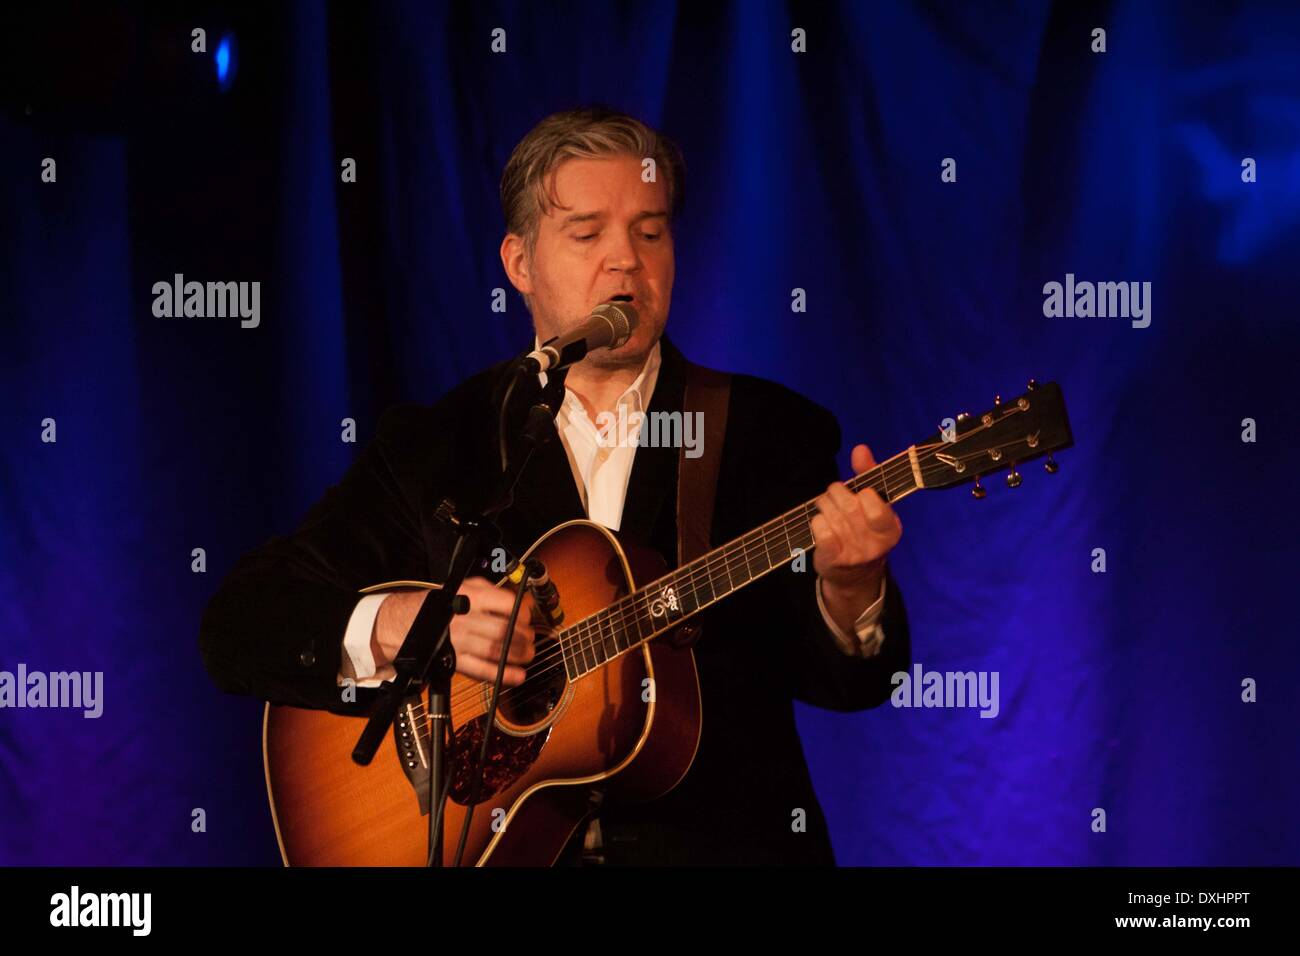 Lloyd Cole performing at Sub 89, Reading. He was the lead singer of Lloyd Cole and the Commotions. Stock Photo